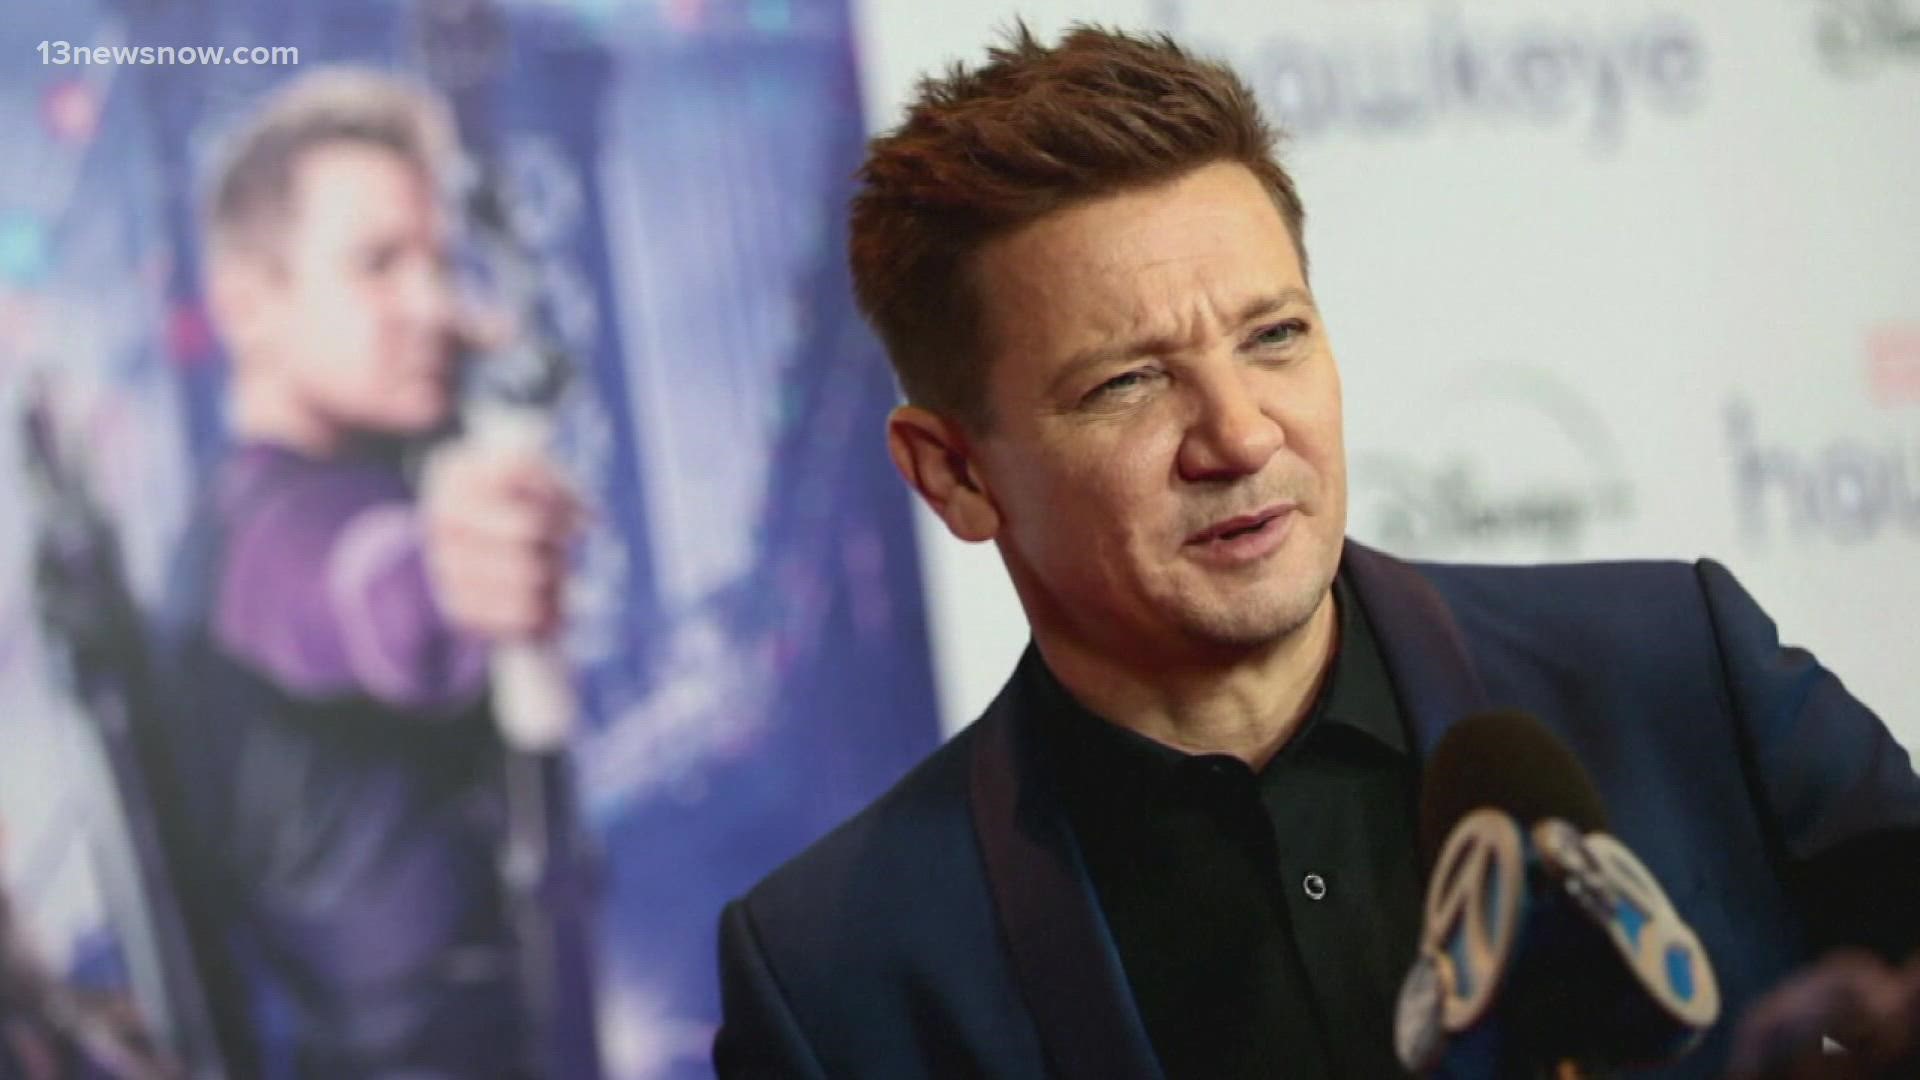 We're learning more details on the condition of actor Jeremy Renner, best known for his role as Hawkeye in the Marvel Cinematic Universe.